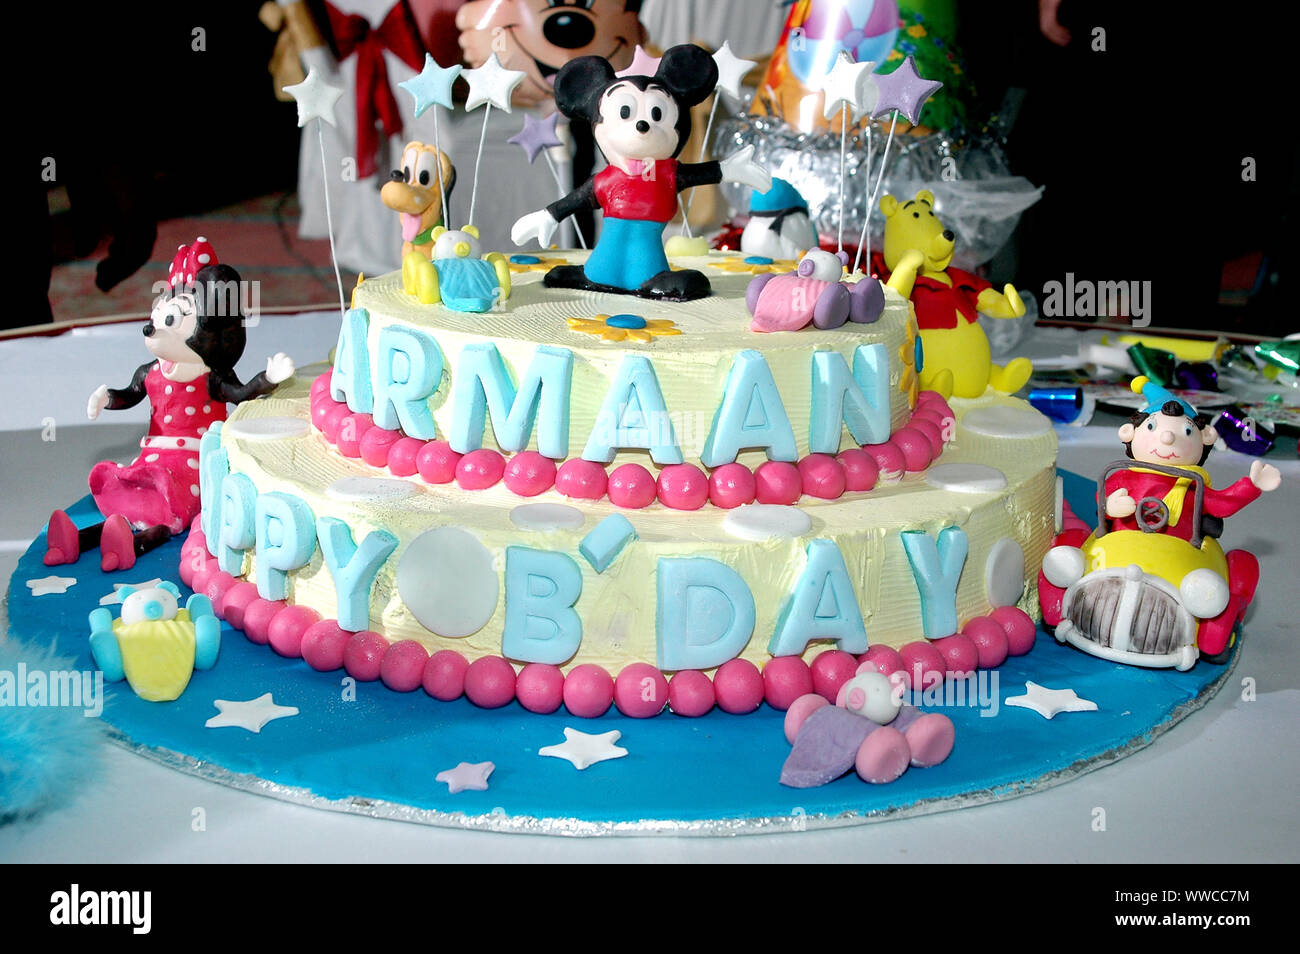 Colorful birthday cake decorated with little cartoon characters on the top  Stock Photo - Alamy